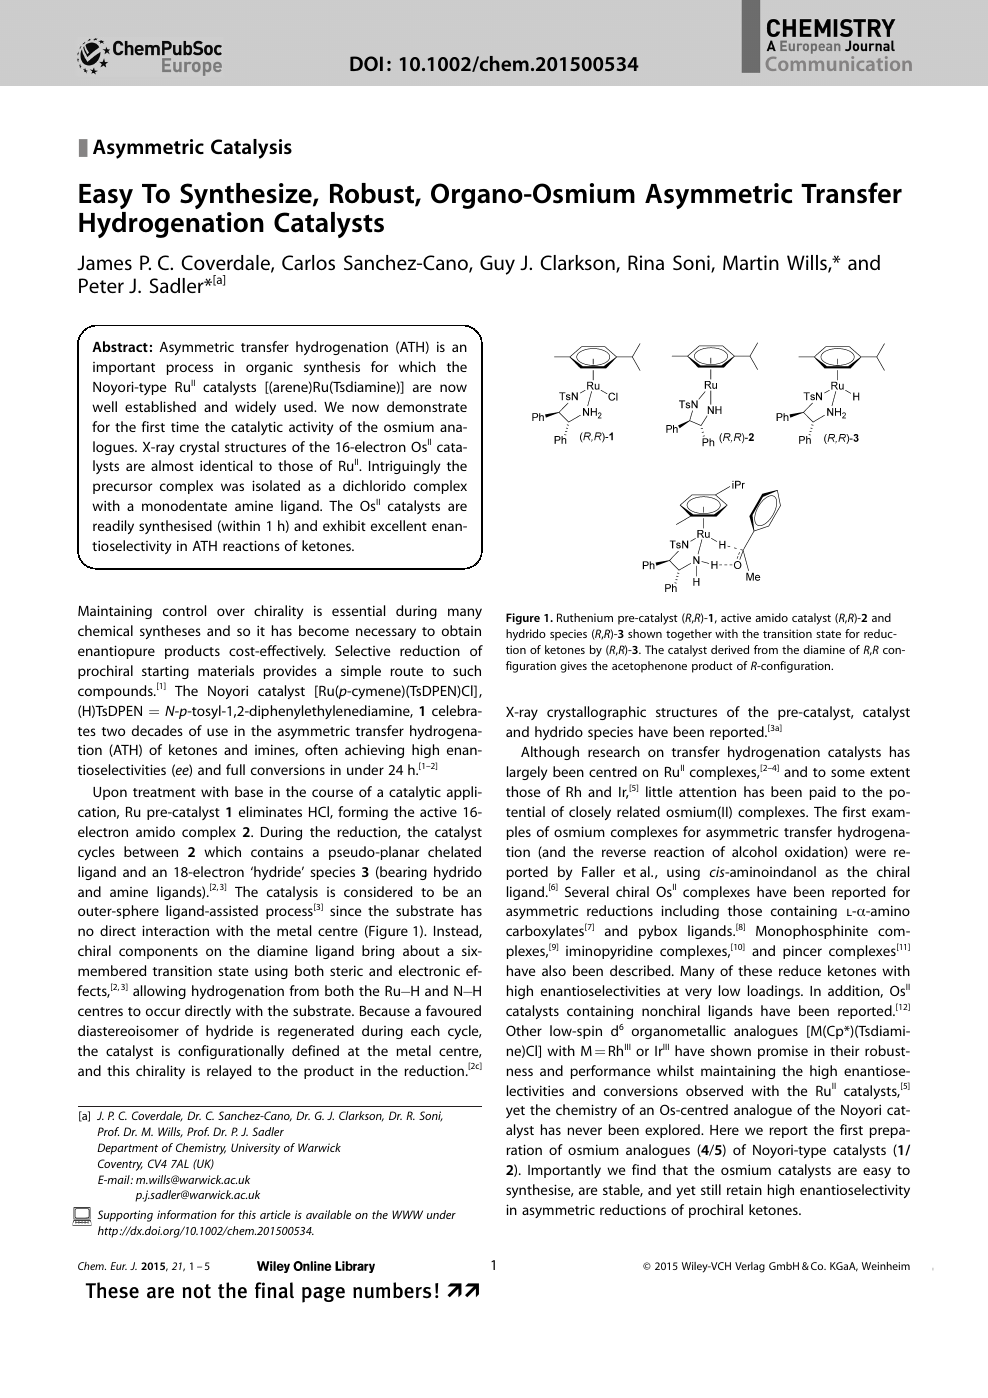 Easy To Synthesize Robust Organo Osmium Asymmetric Transfer Hydrogenation Catalysts Topic Of Research Paper In Chemical Sciences Download Scholarly Article Pdf And Read For Free On Cyberleninka Open Science Hub